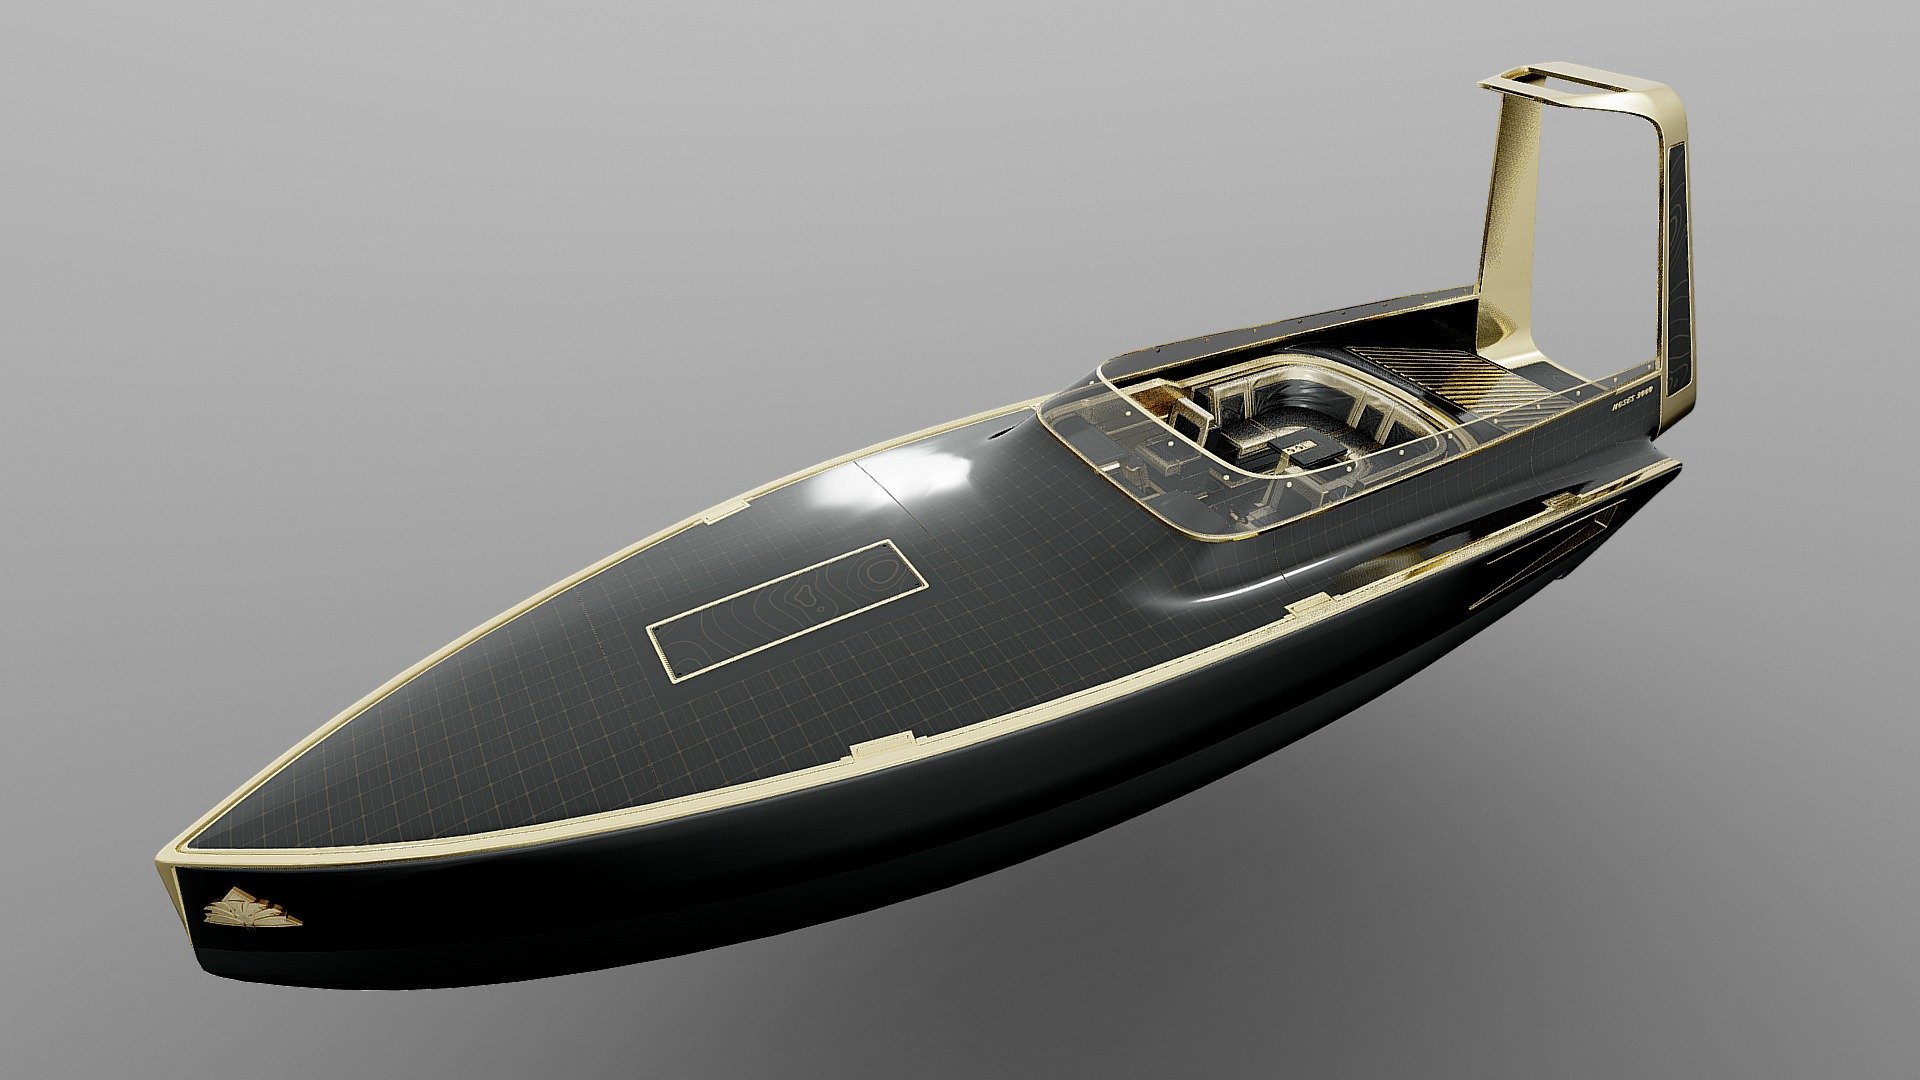 A Luxury electric speed boat concept design. The boat is entirely covered in solar panels, the solar modules are perfectly adapted to the shape of the boat, which transmits extra energy straight to the main battery, which powers groundbreaking Jupiter Jets equipped with more effective inverted turbines capable of reaching high speeds with zero-emission. The 3D model is optimized for real-time engines such as Unreal Engine and Unity. The Speed boat was created and modeled with ZBrush and textured with Adobe Substance 3D Painter. 

Also, check out the MOSES 6000! https://skfb.ly/ovnGV

For more visit

ArtStation: https://www.artstation.com/artwork/wJnJnX   

Behance: https://www.behance.net/gallery/145911851/MOSES-9000-VR

Thank you for watching! - MOSES 9000 - Buy Royalty Free 3D model by Bartholomew Koziel (@bkoziel) 3d model